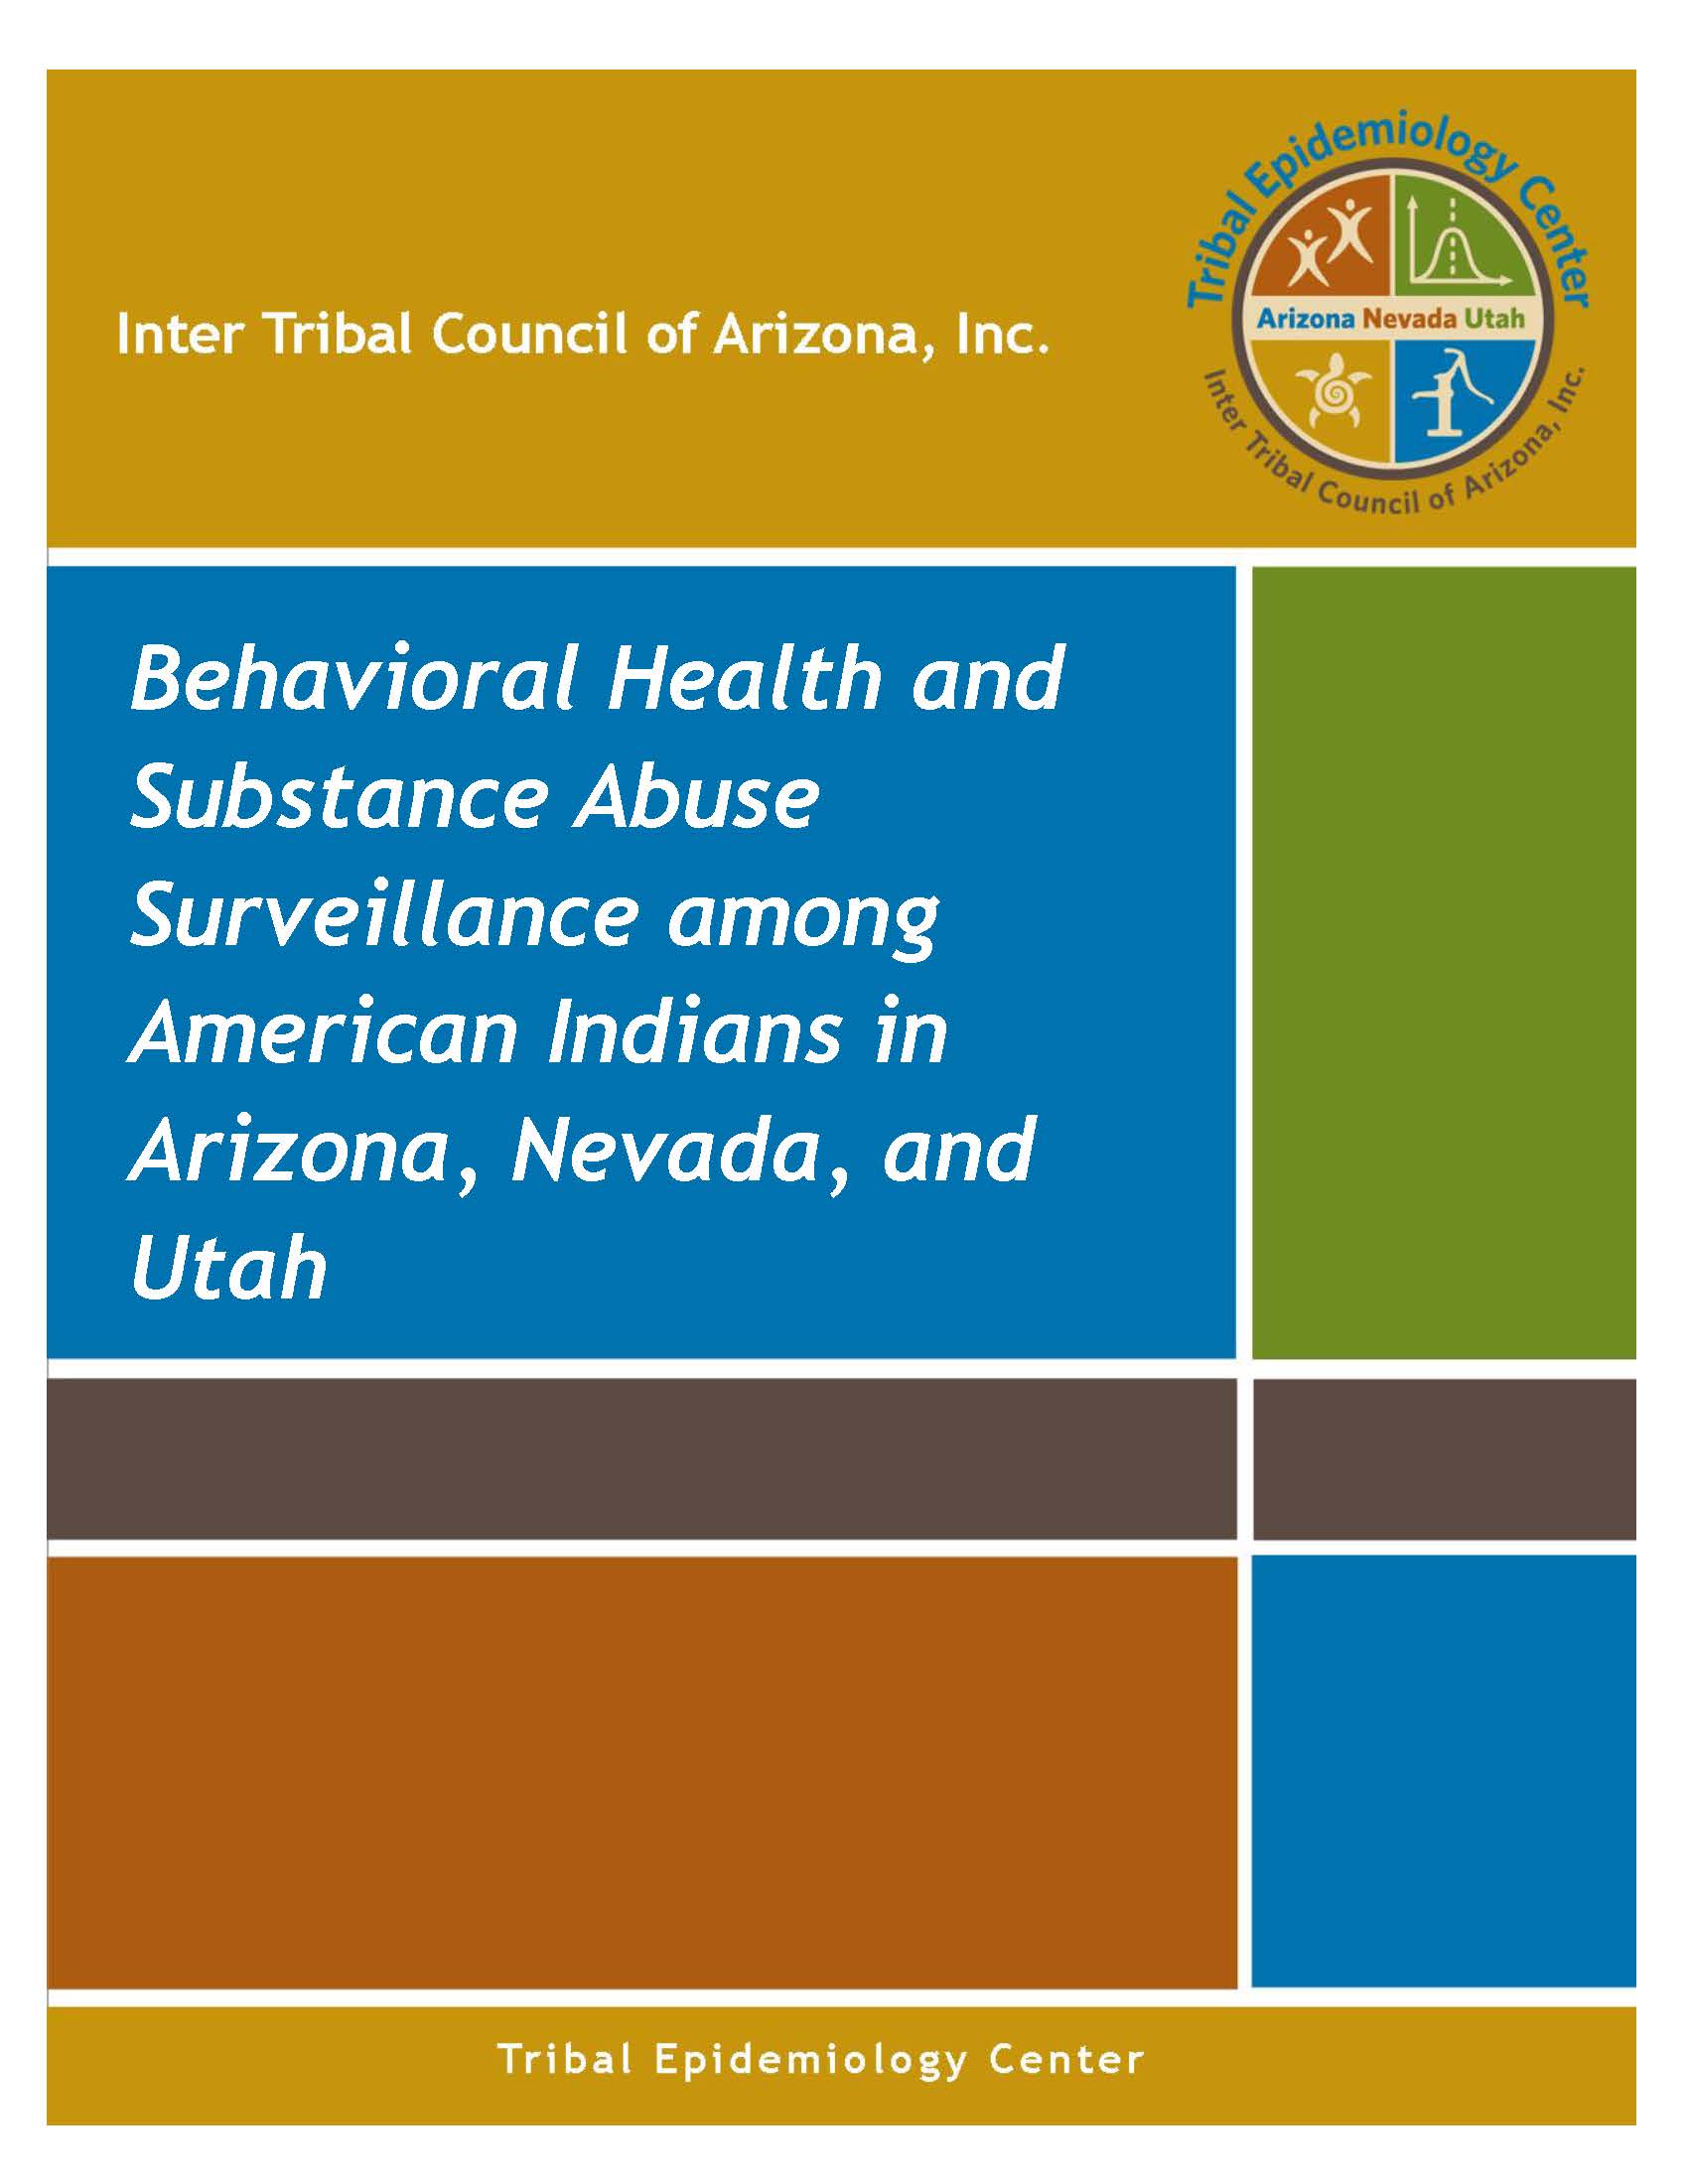 Behavioral Health and Substance Abuse Surveillance among American Indians in Arizona, Nevada, and Utah Report